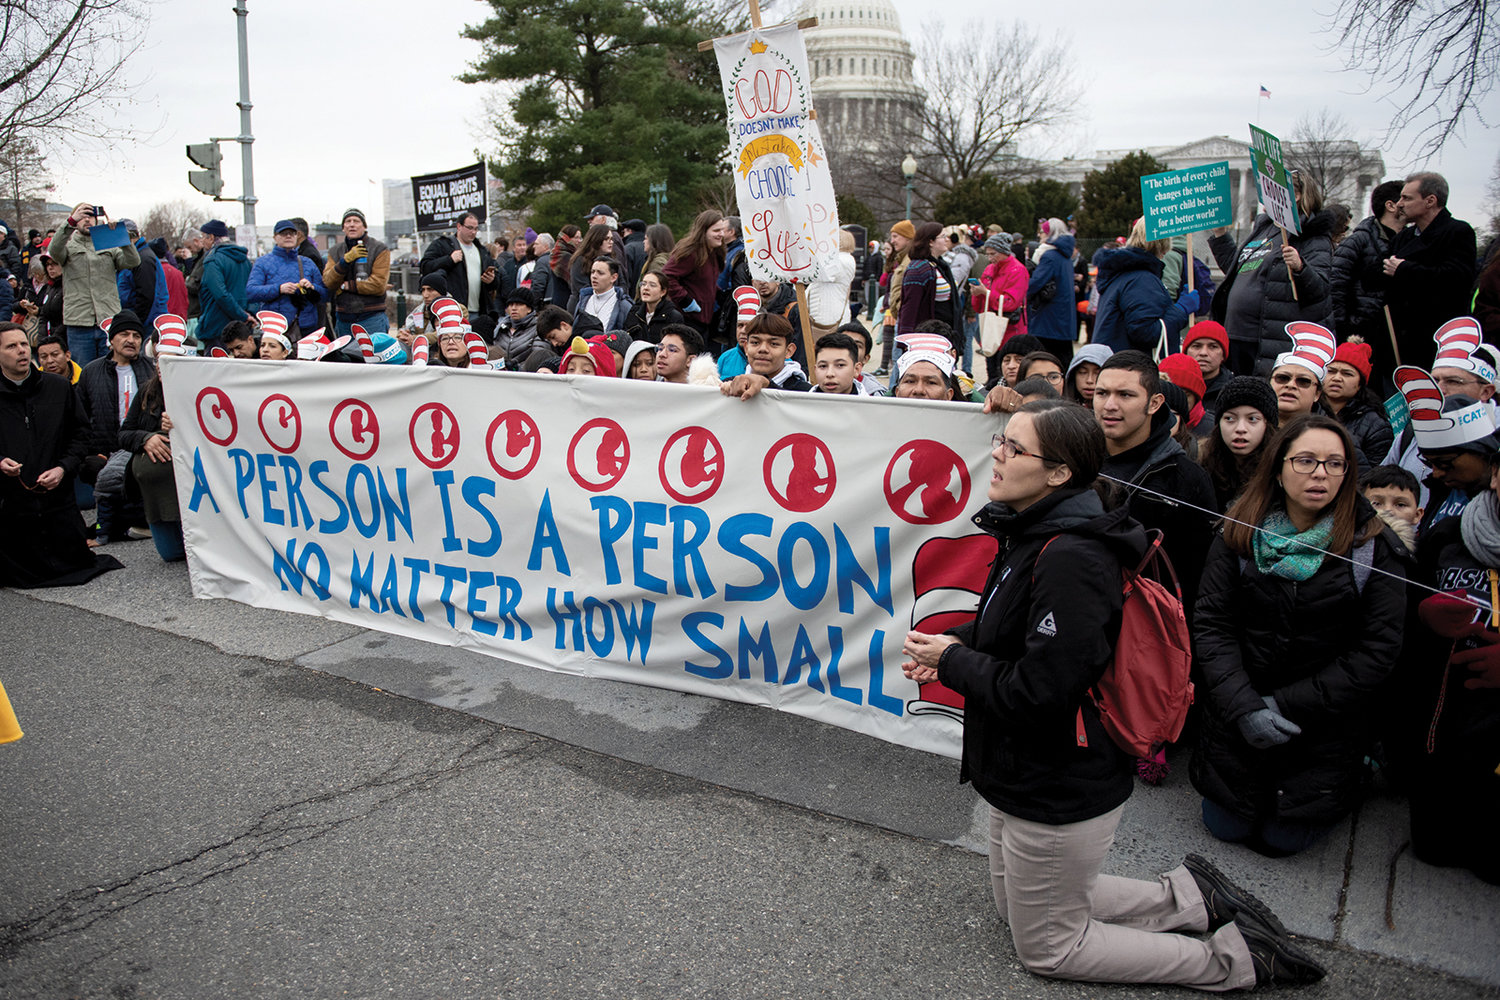 The pro-life sentiments of Dr. Seuss are prayerfully promoted at the March for Life.